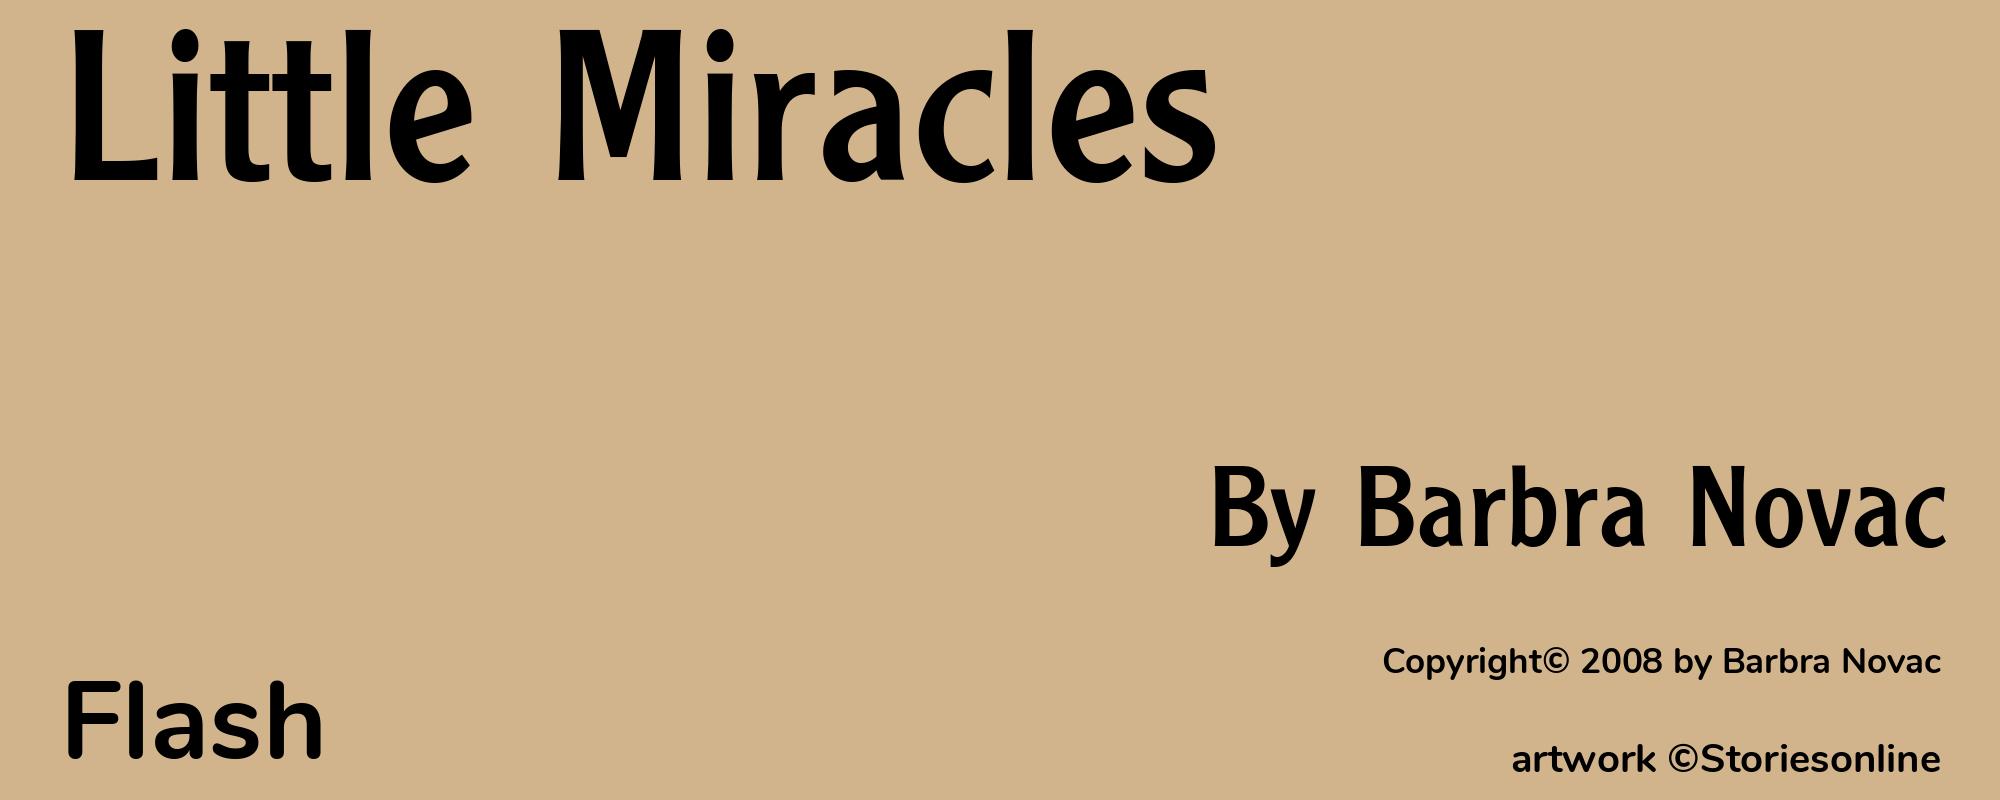 Little Miracles - Cover